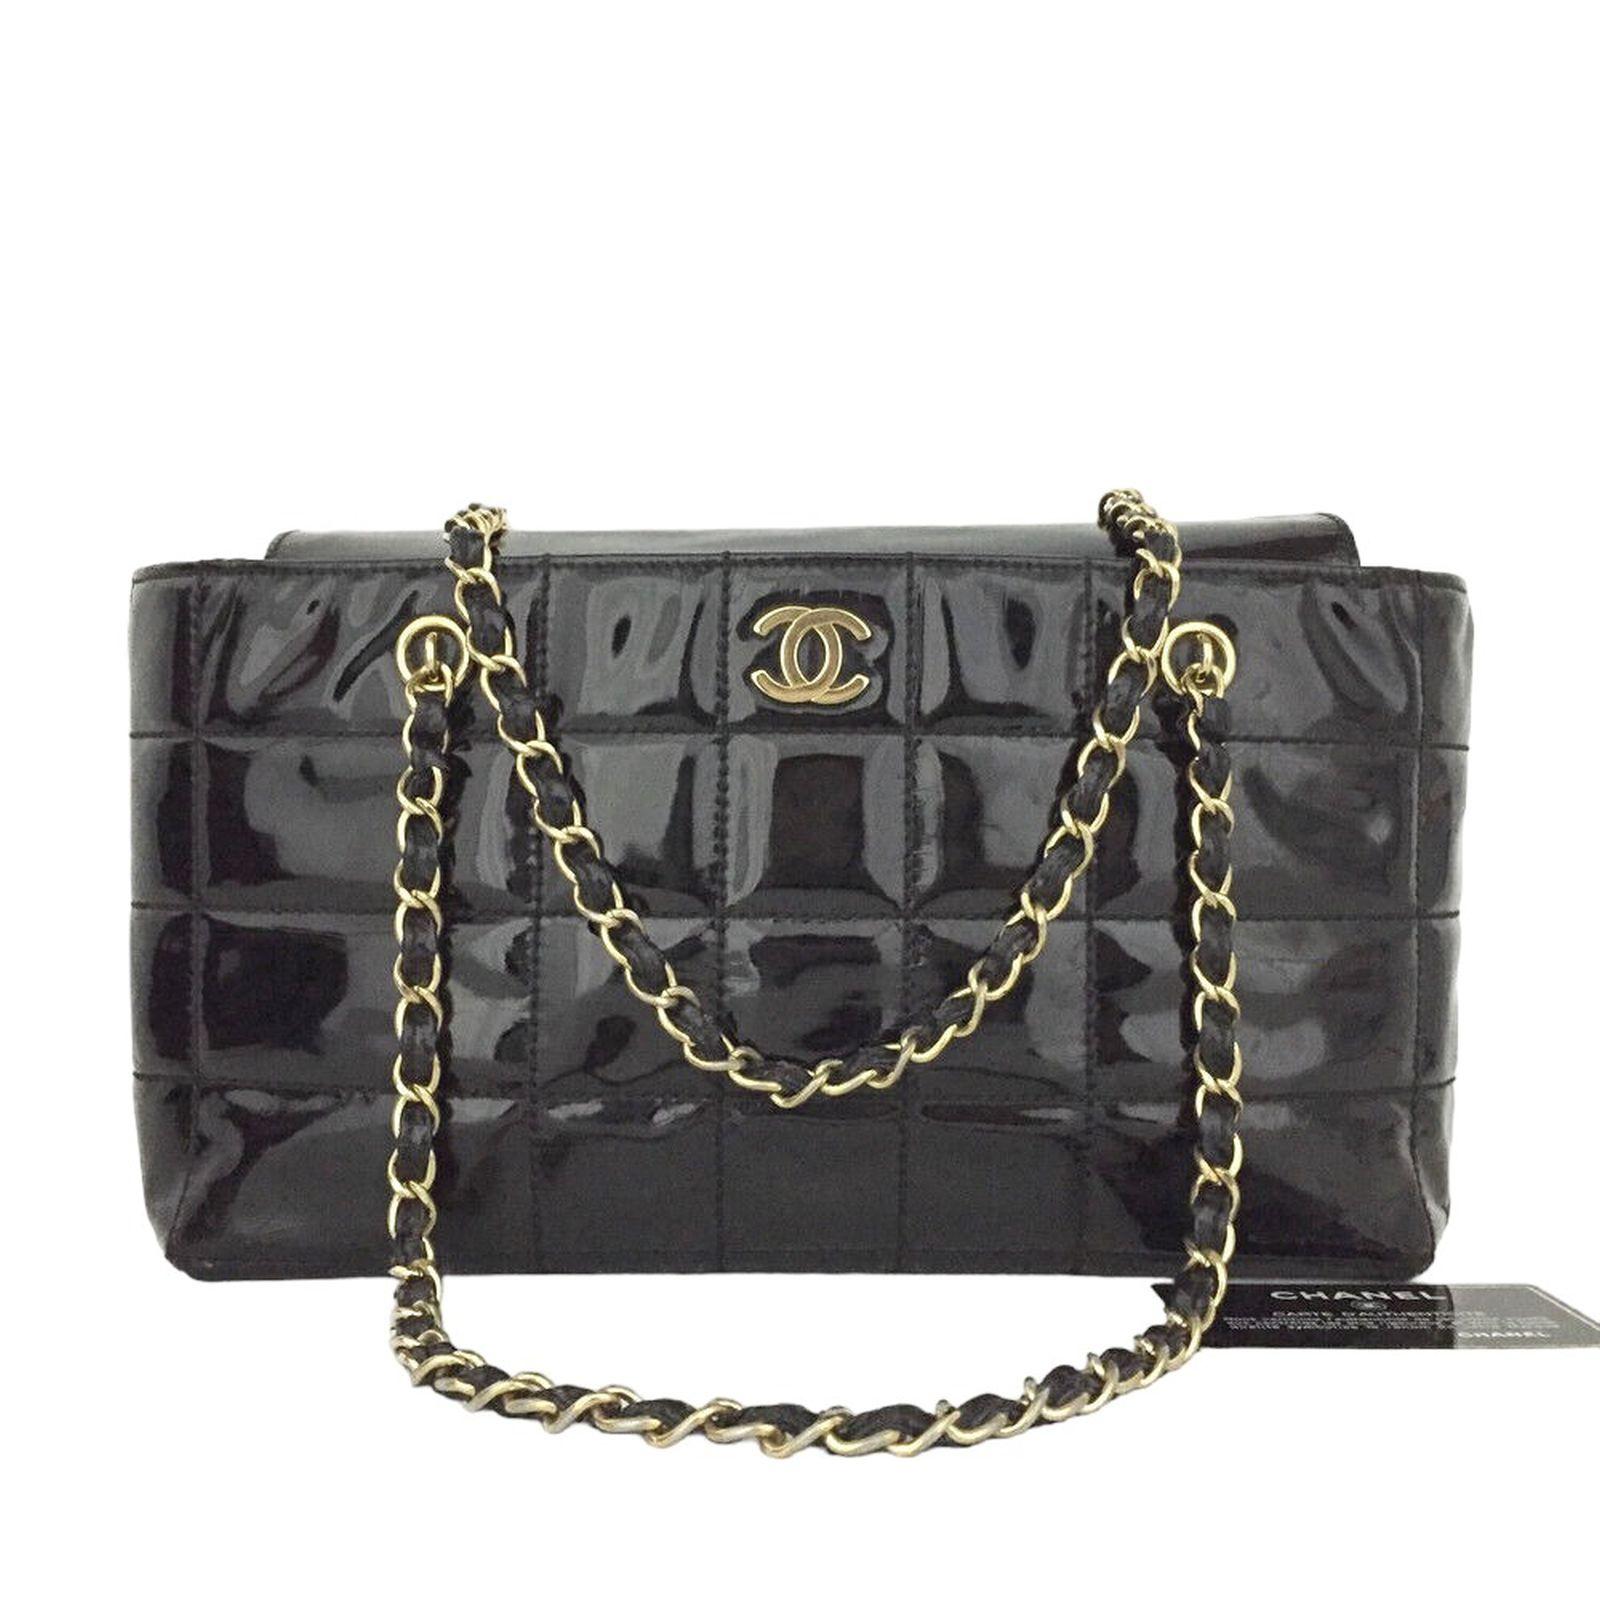 Classic Chanel Black Enamel Shoulder Bag. Leather Chicklet Design. Vintage Chanel with gold color accents. CC in the front of the bag. Leather and gold straps. The interior of the bag is leather and has separating compartments. The interior has a